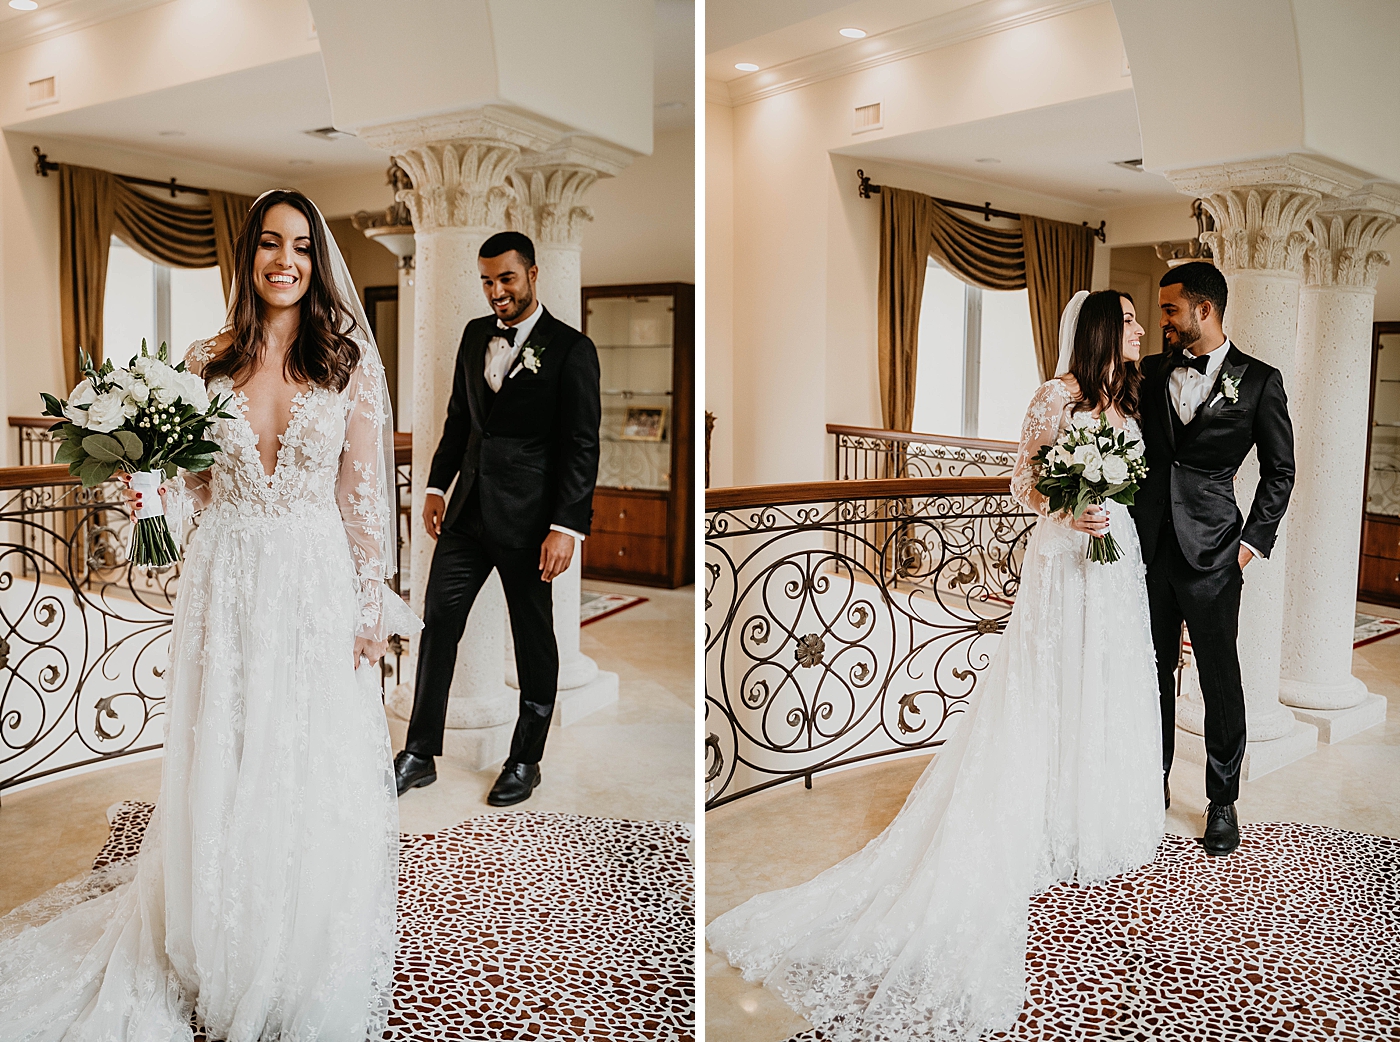 Bride and Groom portraits Intimate Home Wedding captured by South Florida Wedding Photographer Krystal Capone Photography